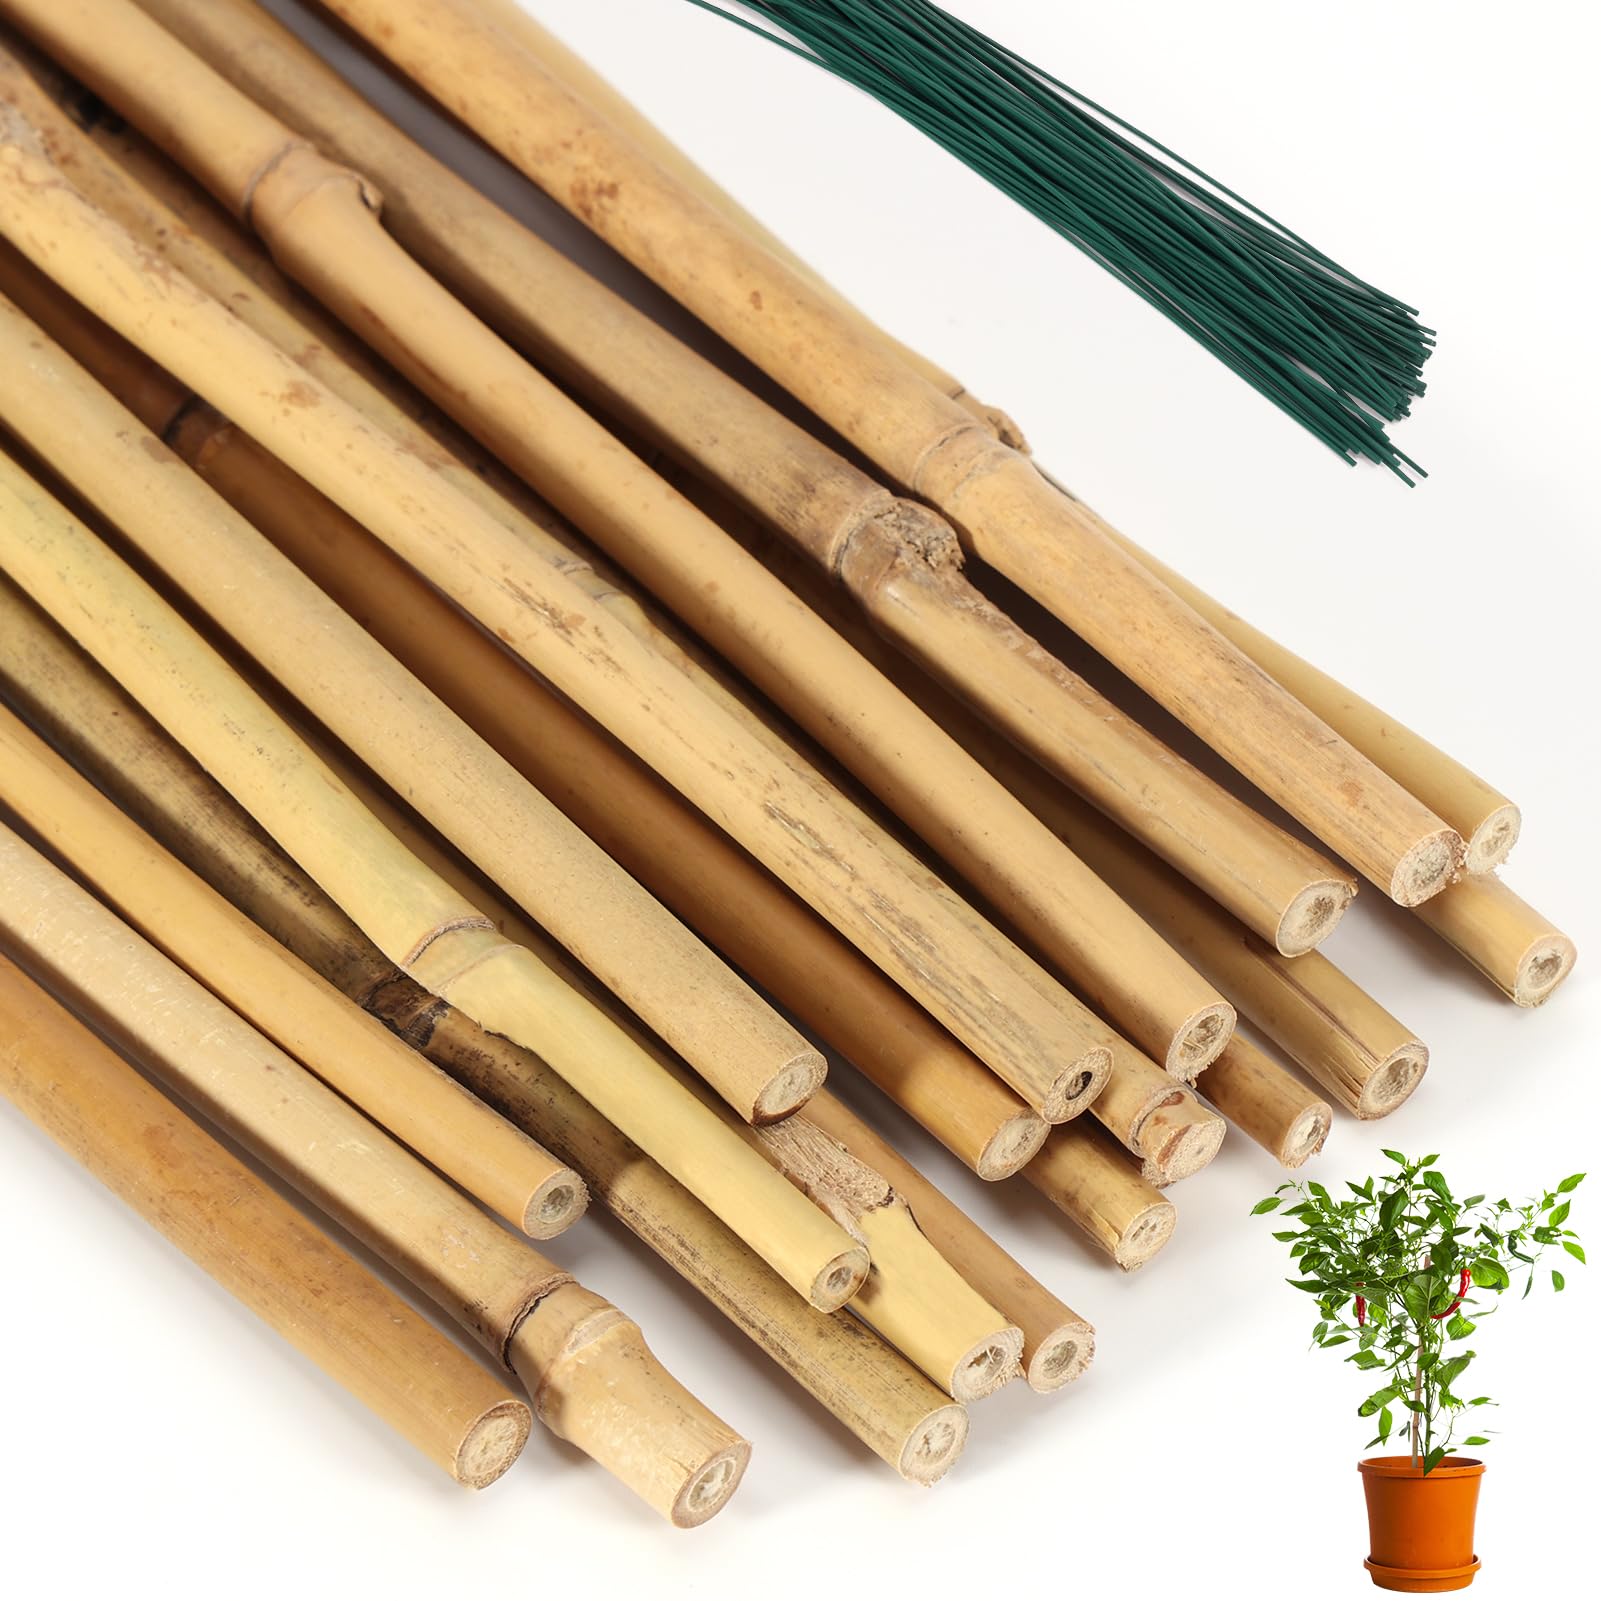 150 Pieces Natural Bamboo Sticks- Extra Long 15.7 inch Wooden Crafts Sticks Stakes for Crafting Arts Projects